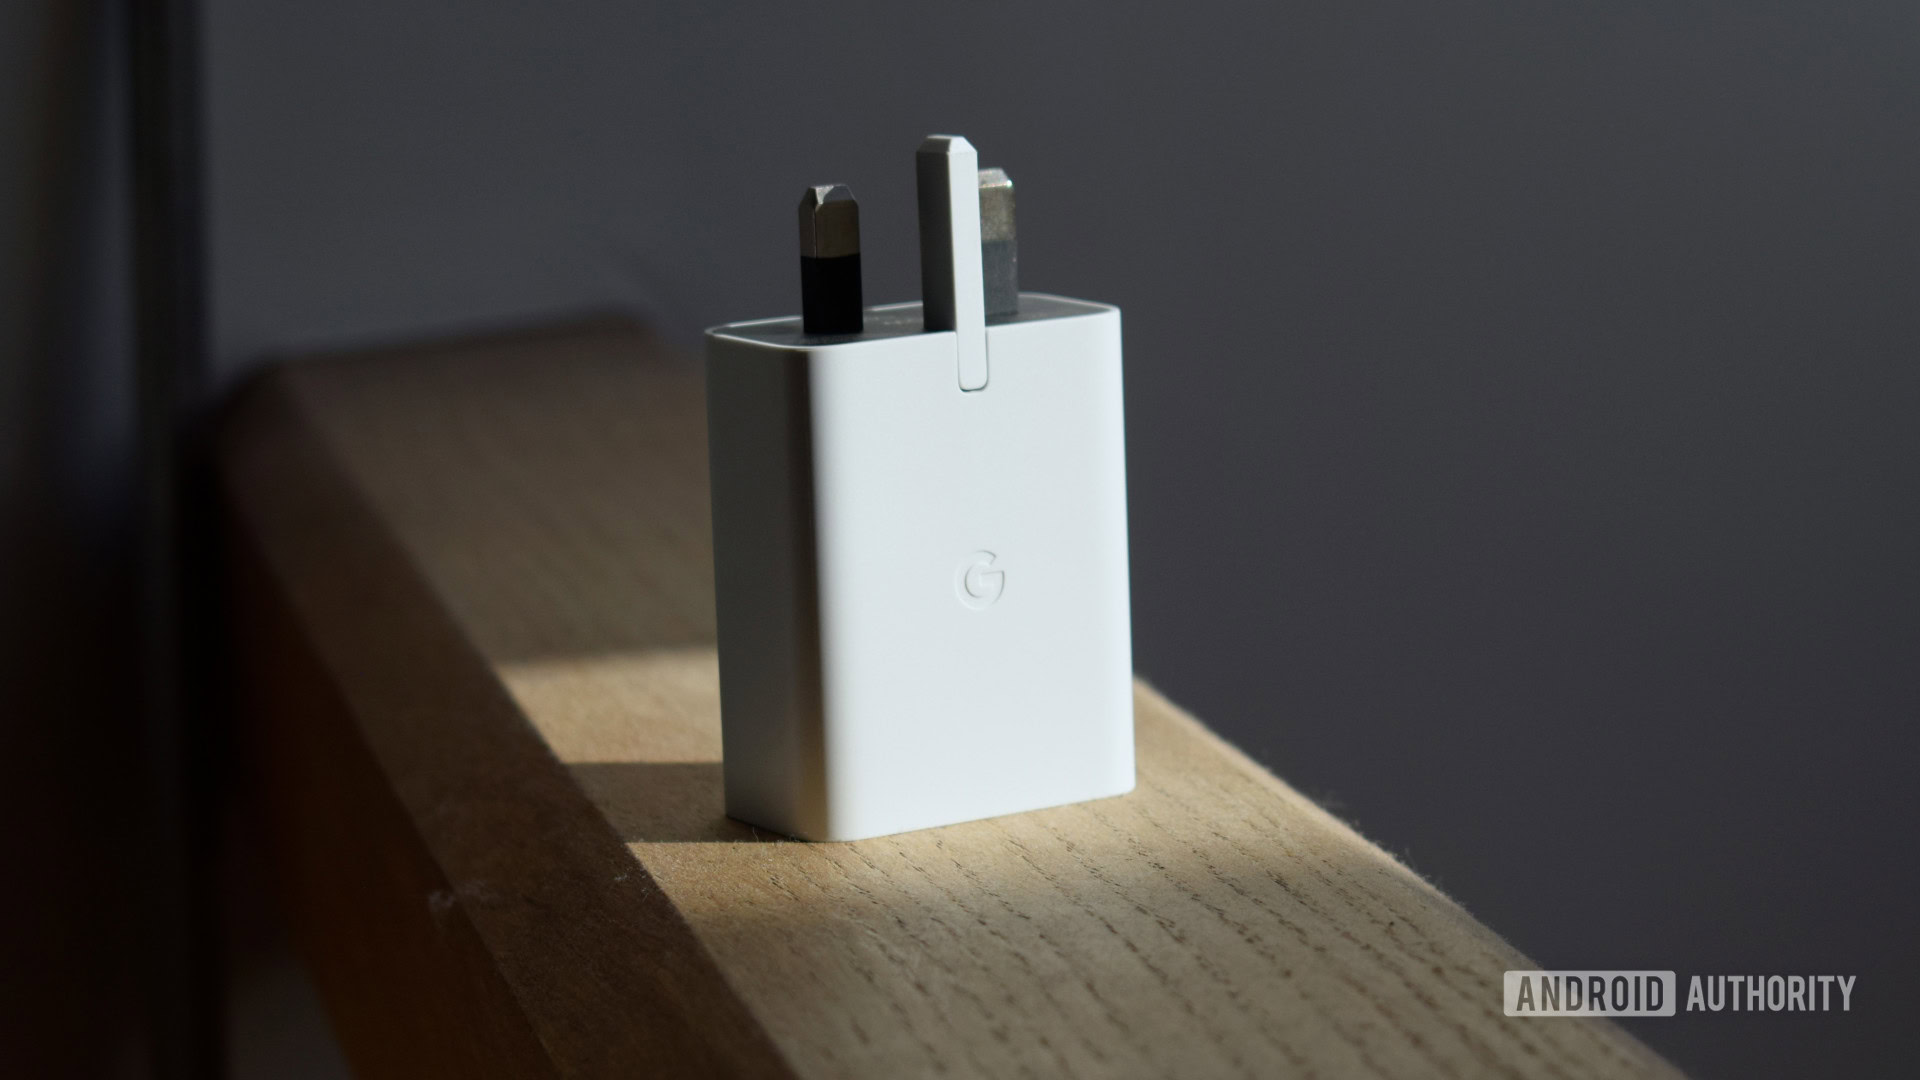 Google 30W USB-C Power Adapter standing upright on wooden beam